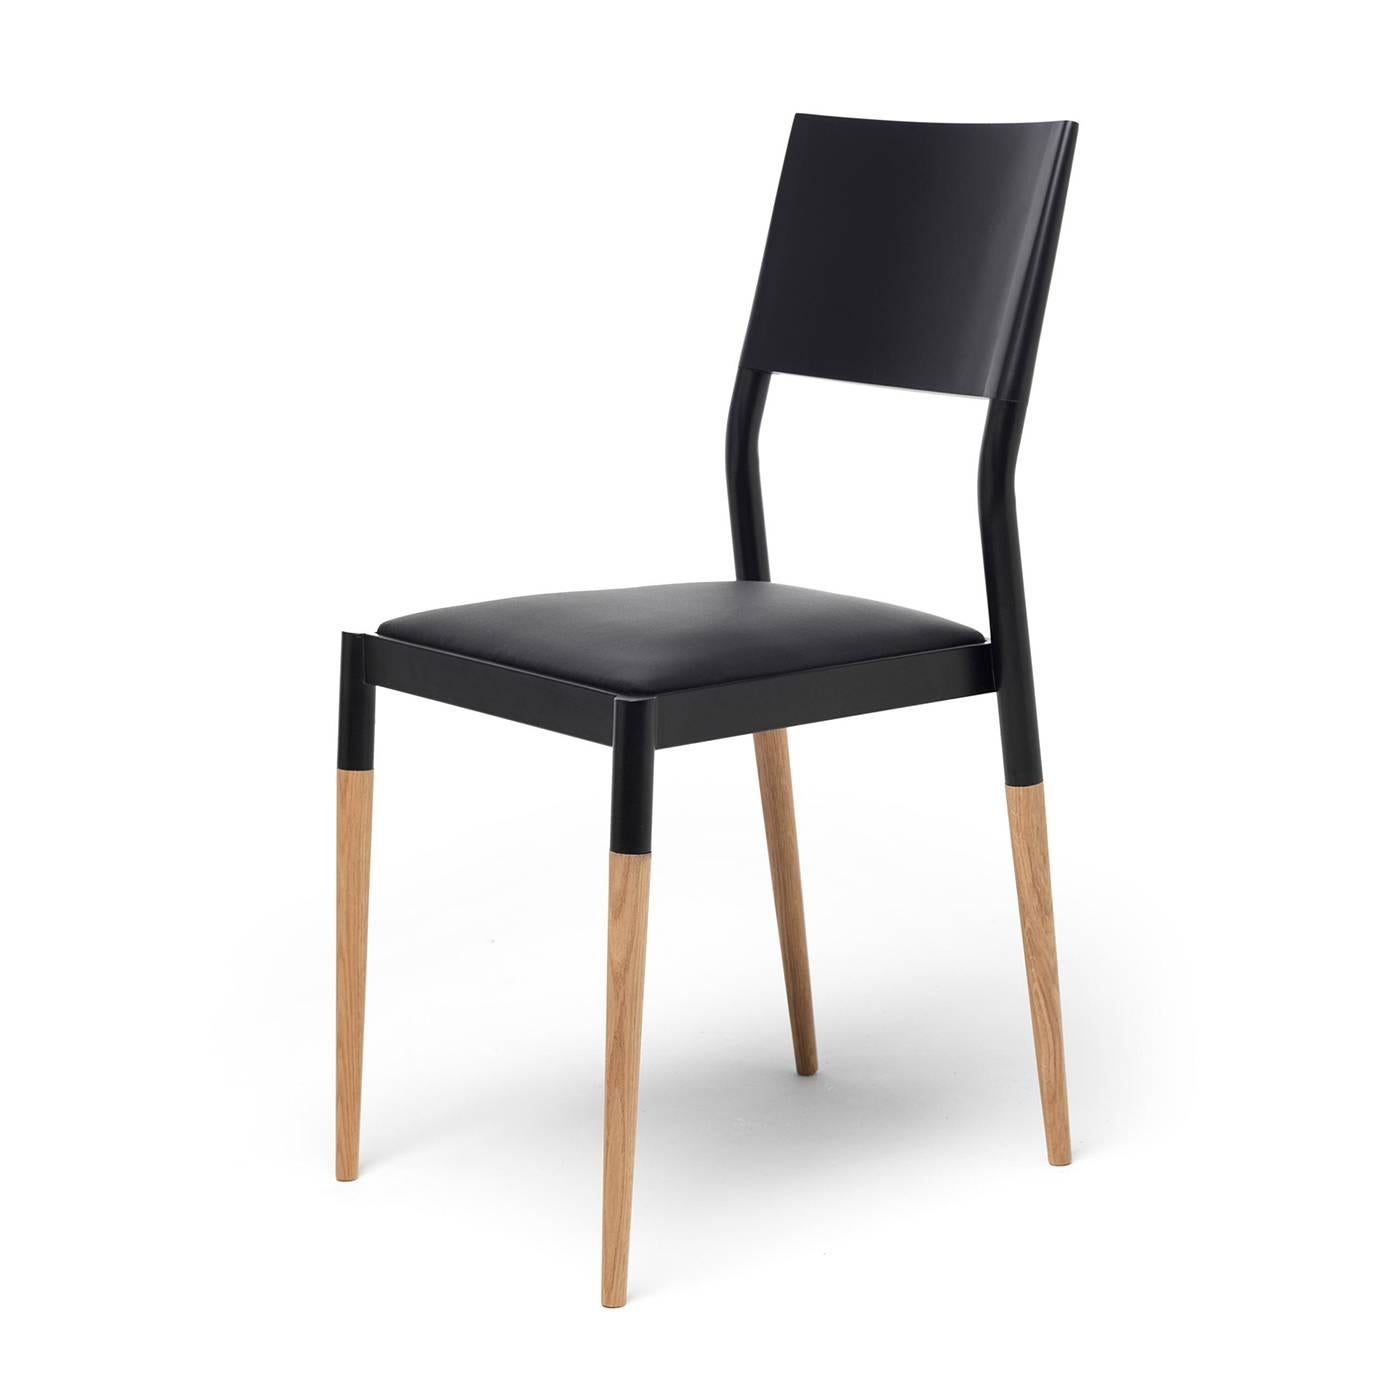 Elegant and modern, this set of two chairs is the perfect complement to a contemporary dining room. Each piece is made using a single metal element that supports the upholstered seat and holds the legs and the armrest. The striking appearance of